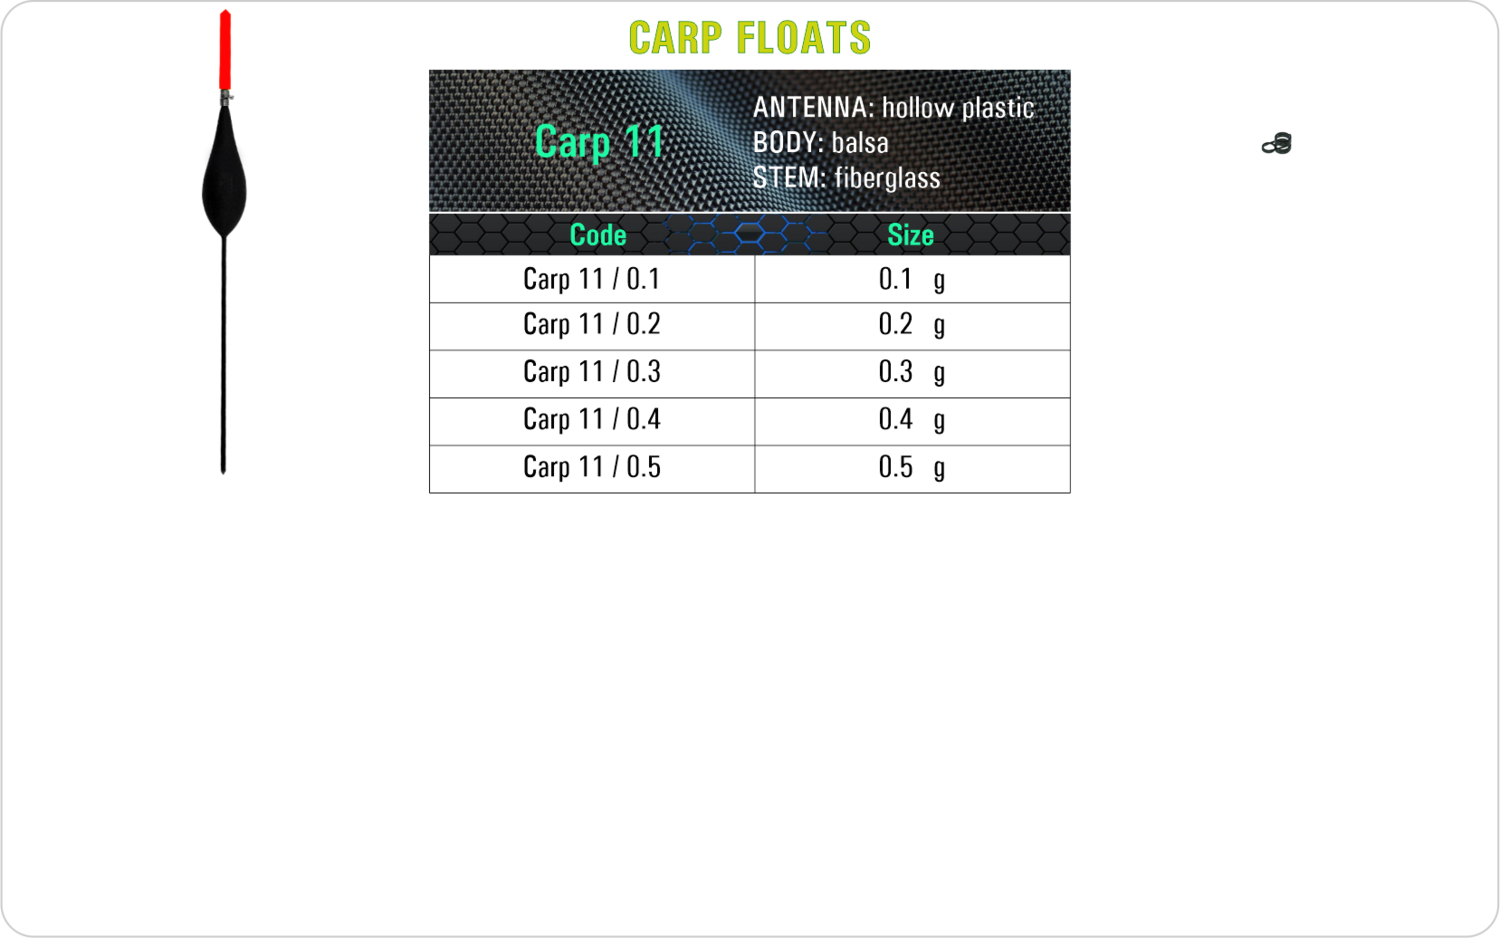 SF Carp 11 Carp float model and table containing an additional information about this float with different codes, sizes, types of the body, the stem and the antenna of the float.